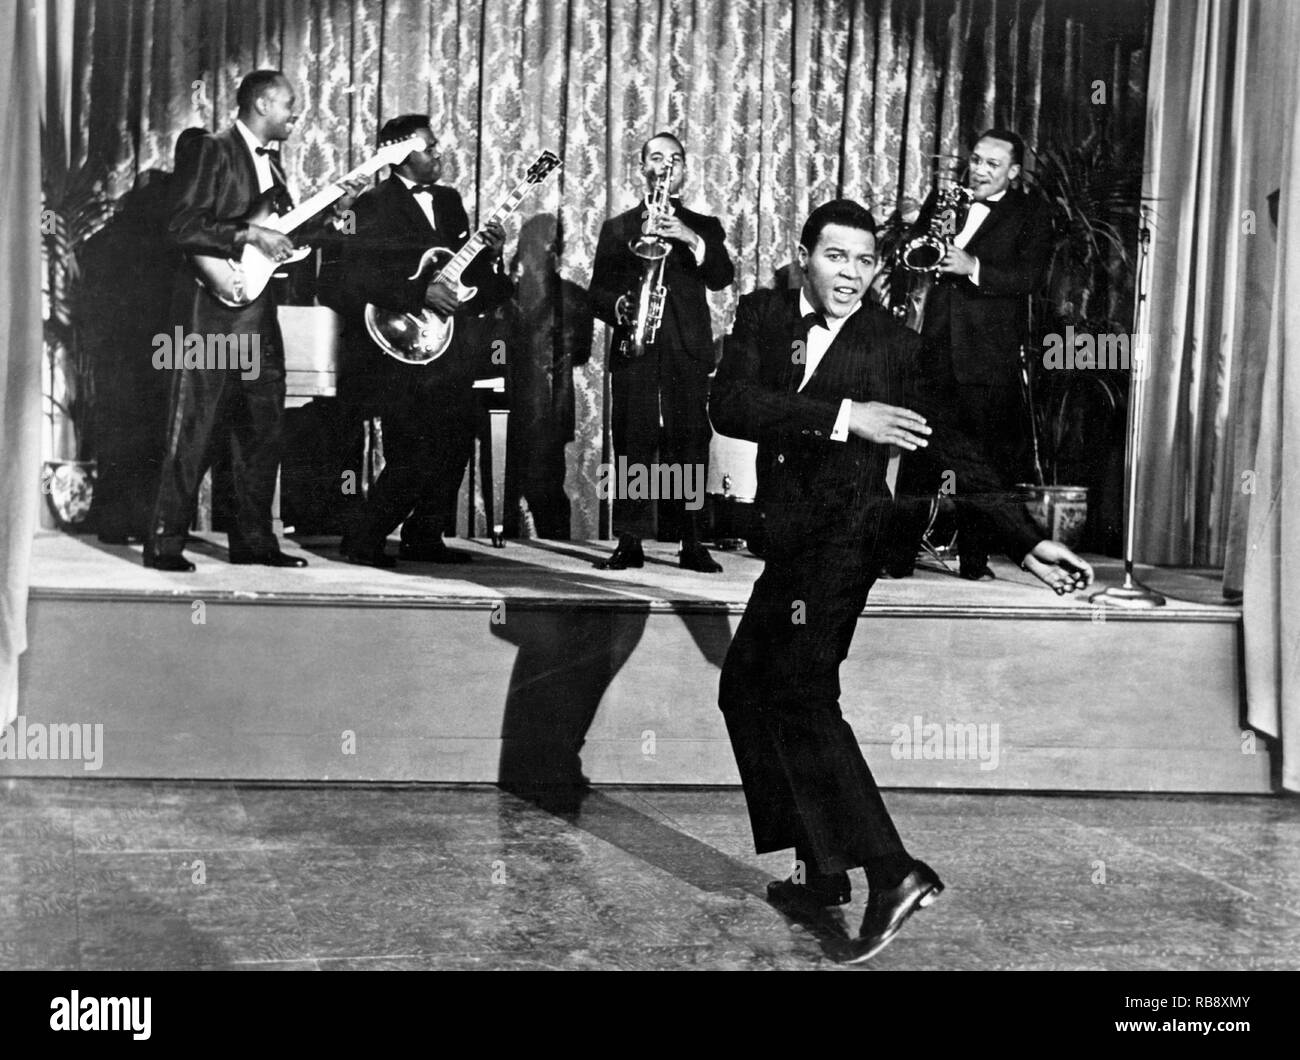 Chubby Checker. Born 1941. American rock 'n roll singer and dancer and is widely known for popularising many dance styles including the twist dance style. Pictured here in the movie Twist around the clock, released in 1961. Stock Photo